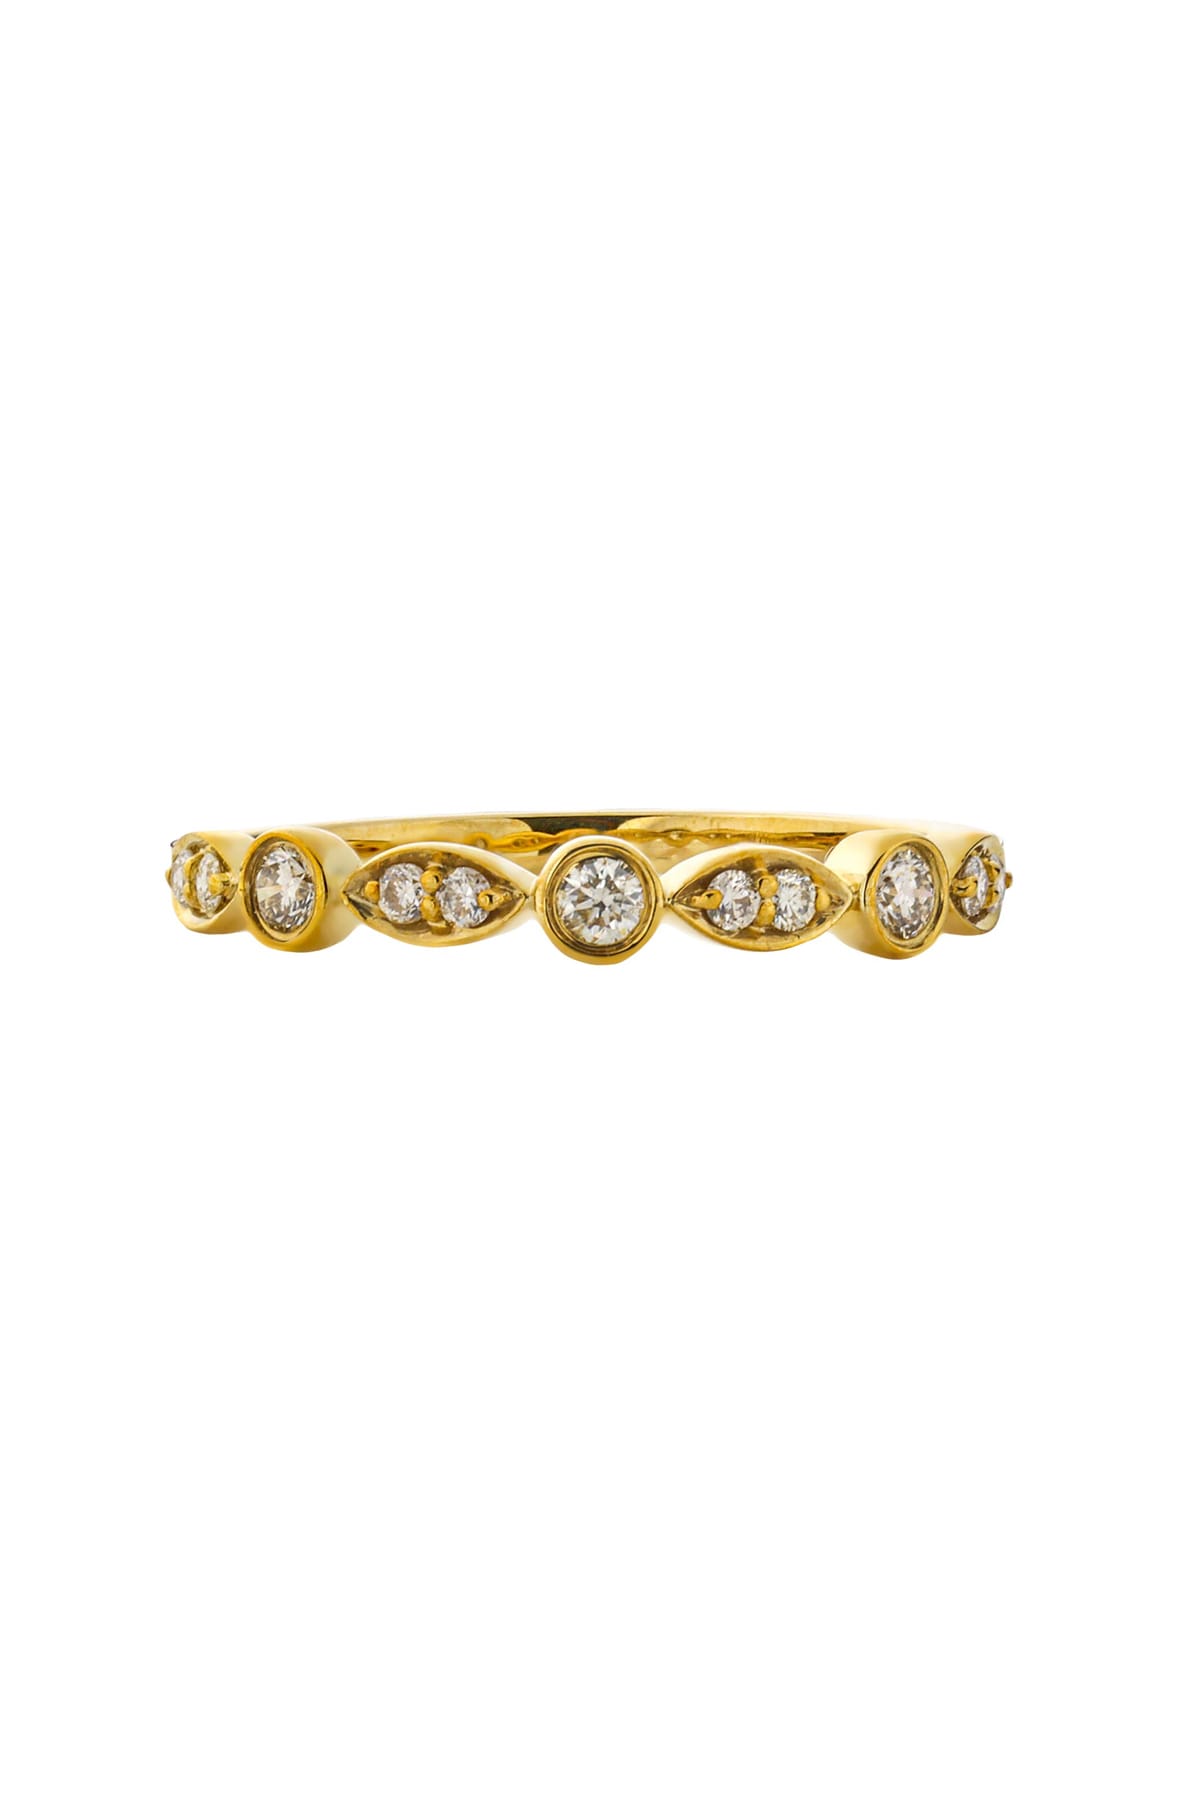 9 Carat Gold Round And Marquise Shaped Diamond Band available at LeGassick Diamonds and Jewellery Gold Coast, Australia.